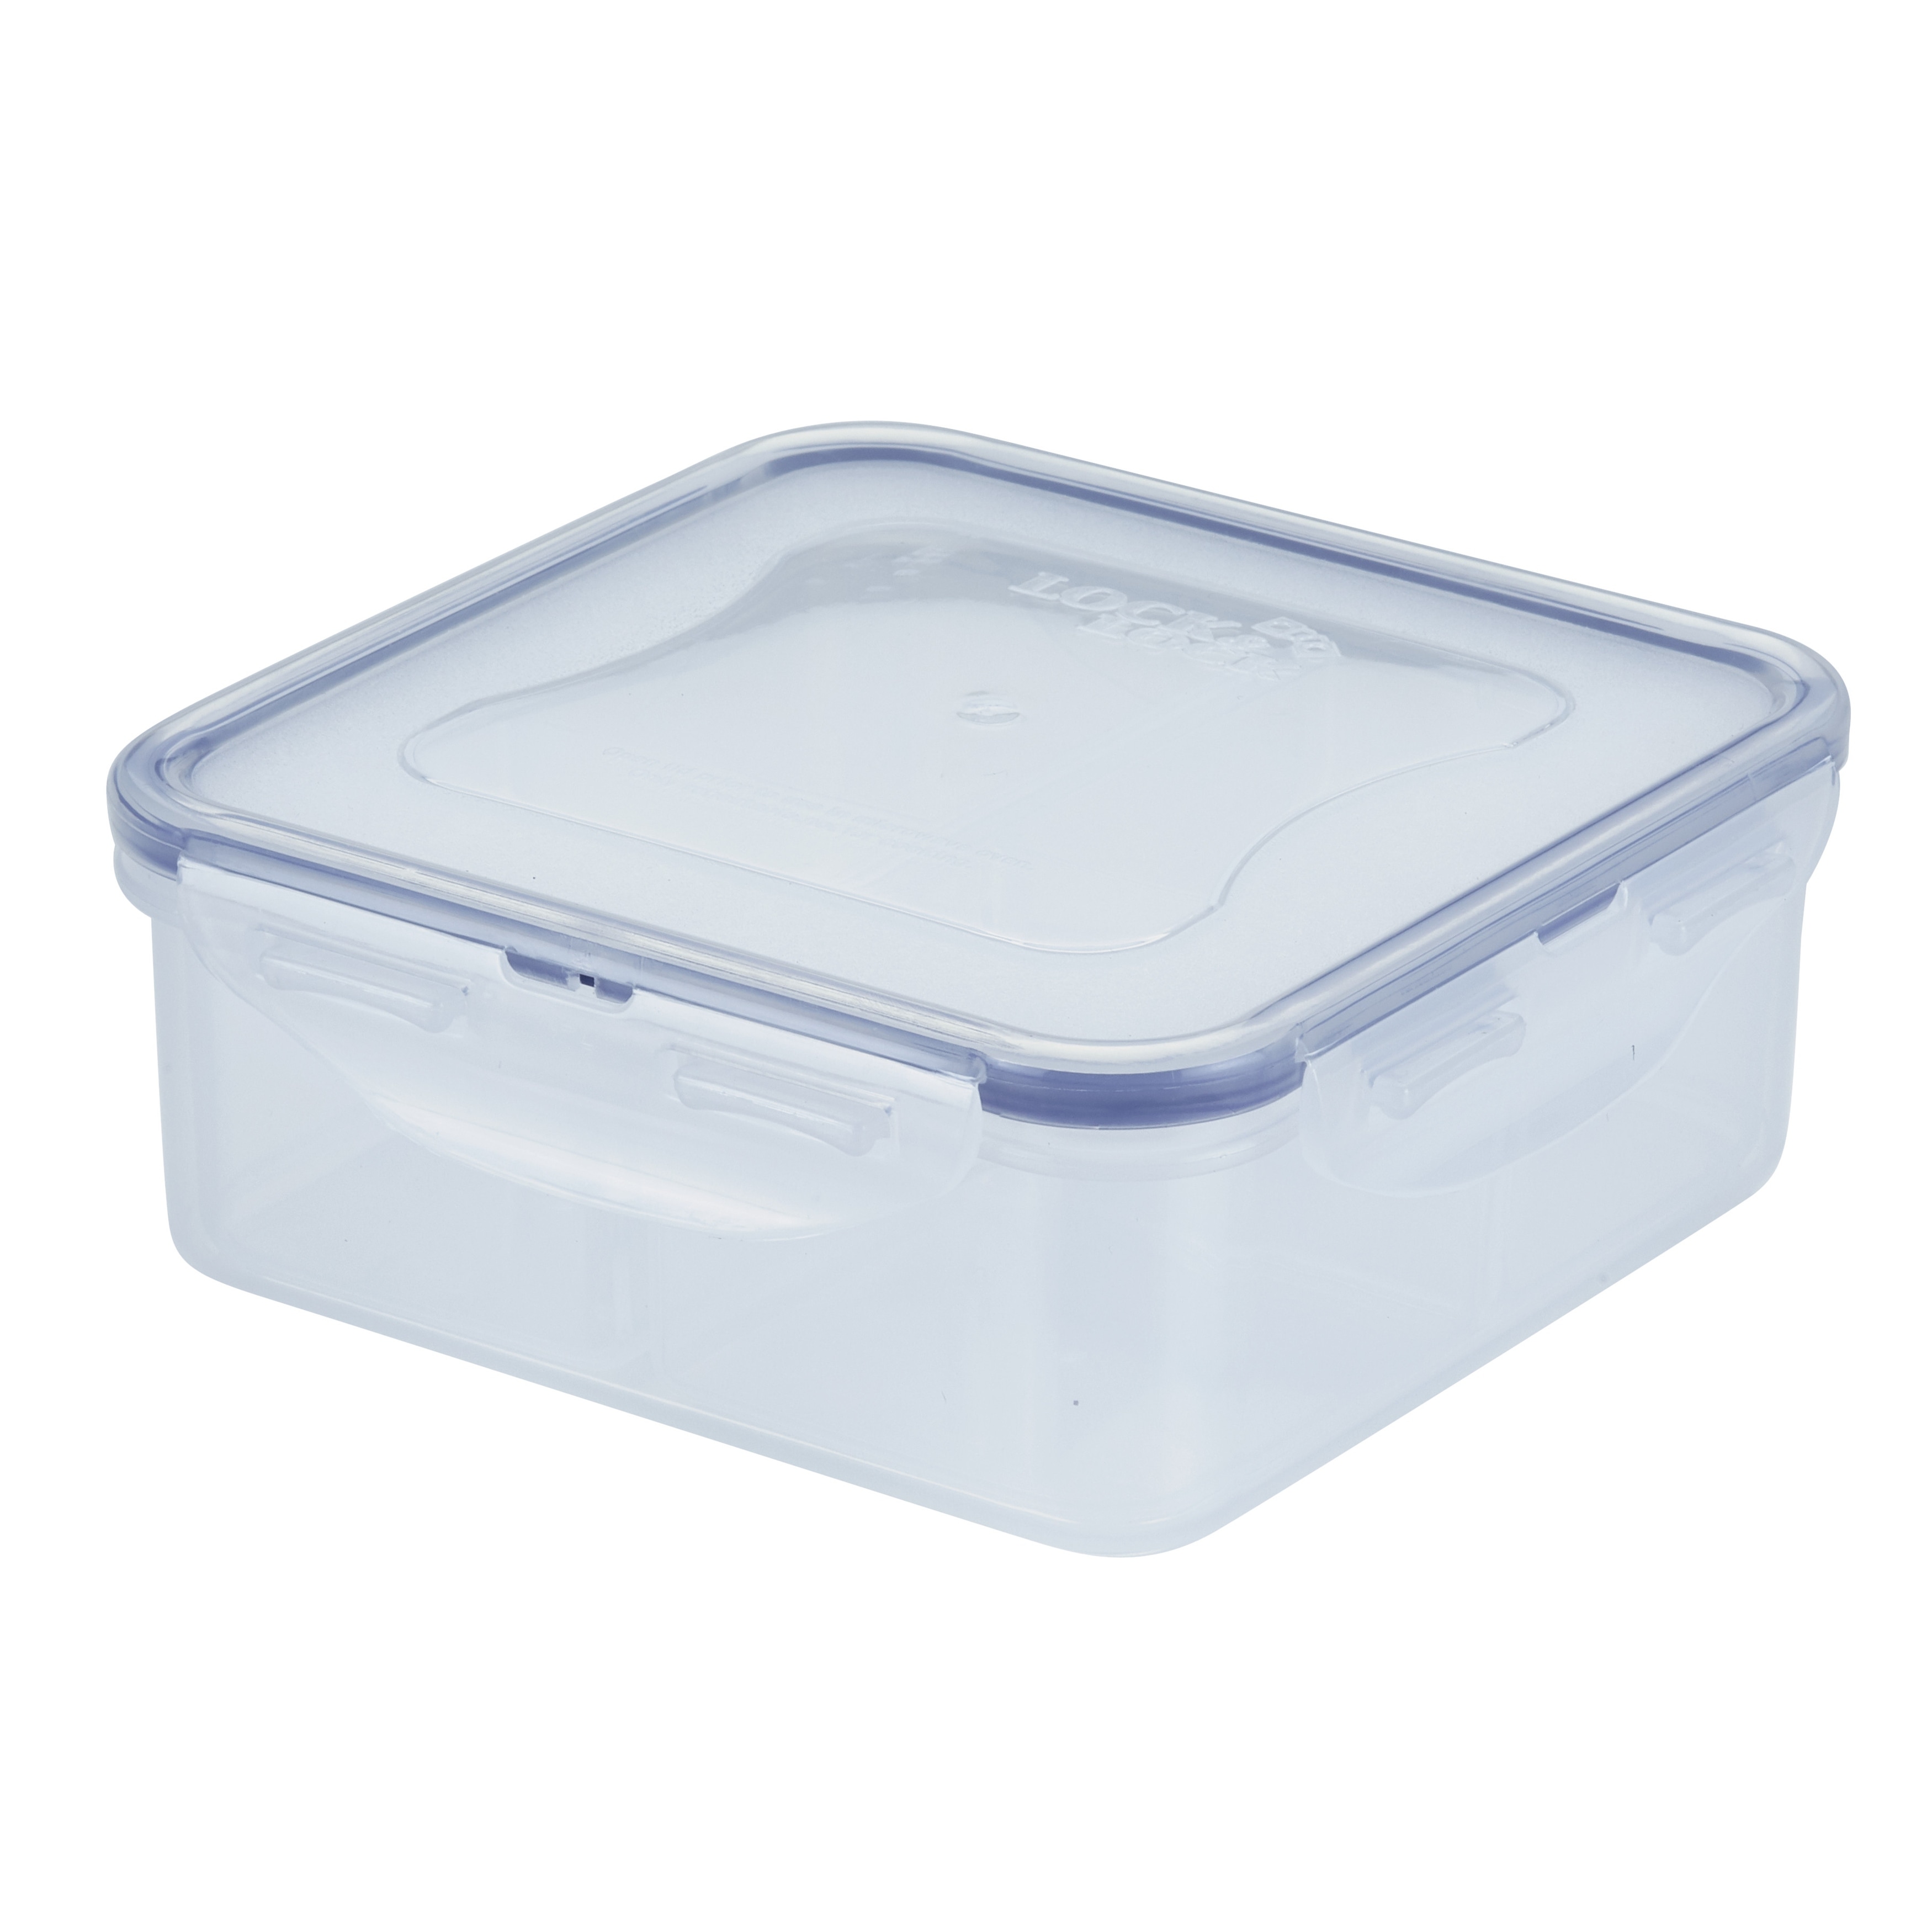 1pc Plastic Sealed Food Storage Container, Square Divided Storage